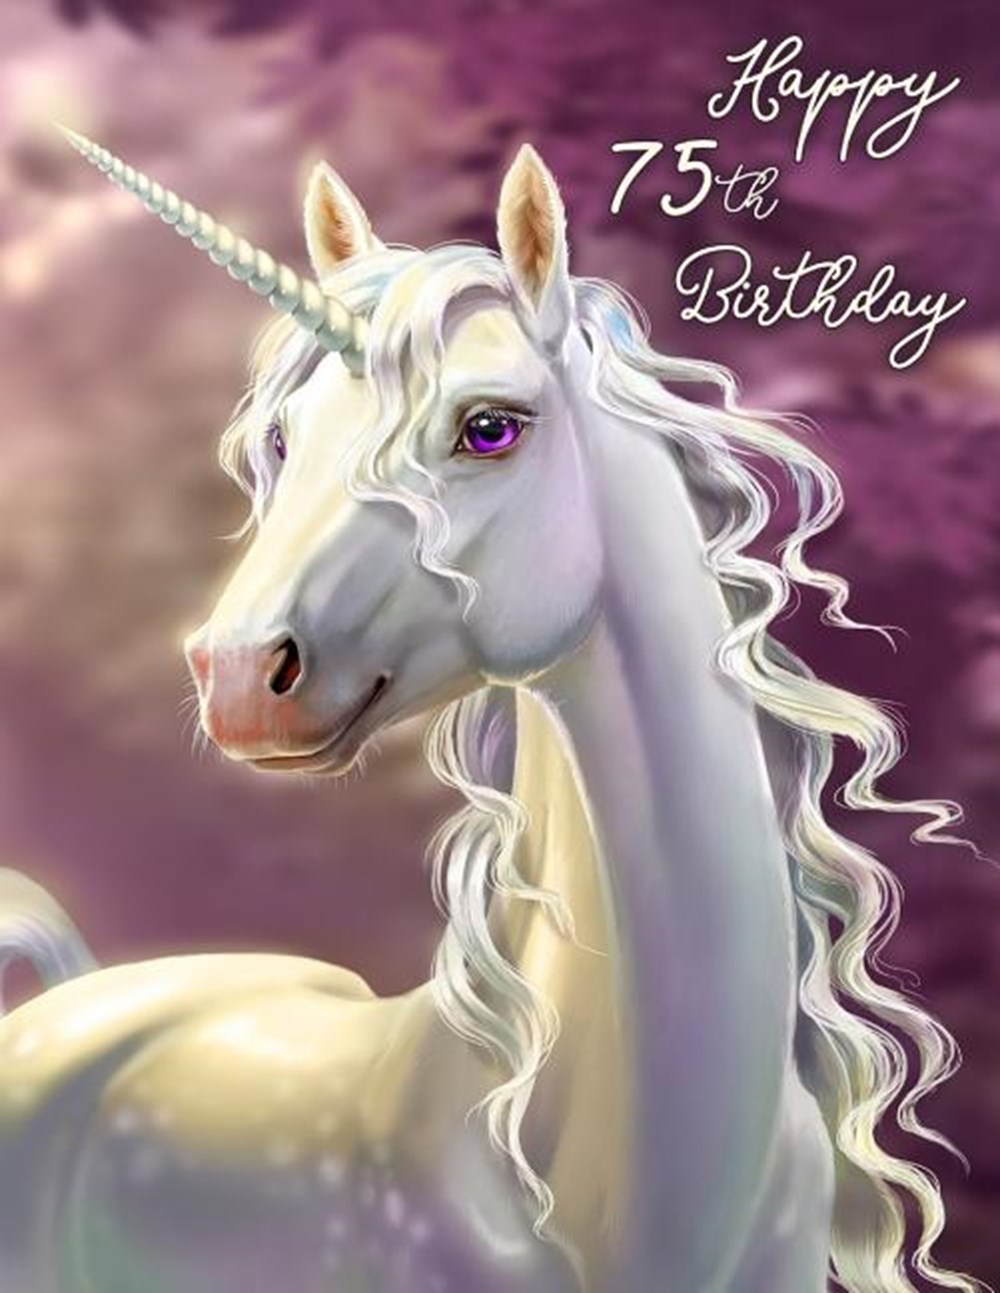 Happy 75th Birthday: Large Print Address Book with Pretty Unicorn Design. Forget the Birthday Card a